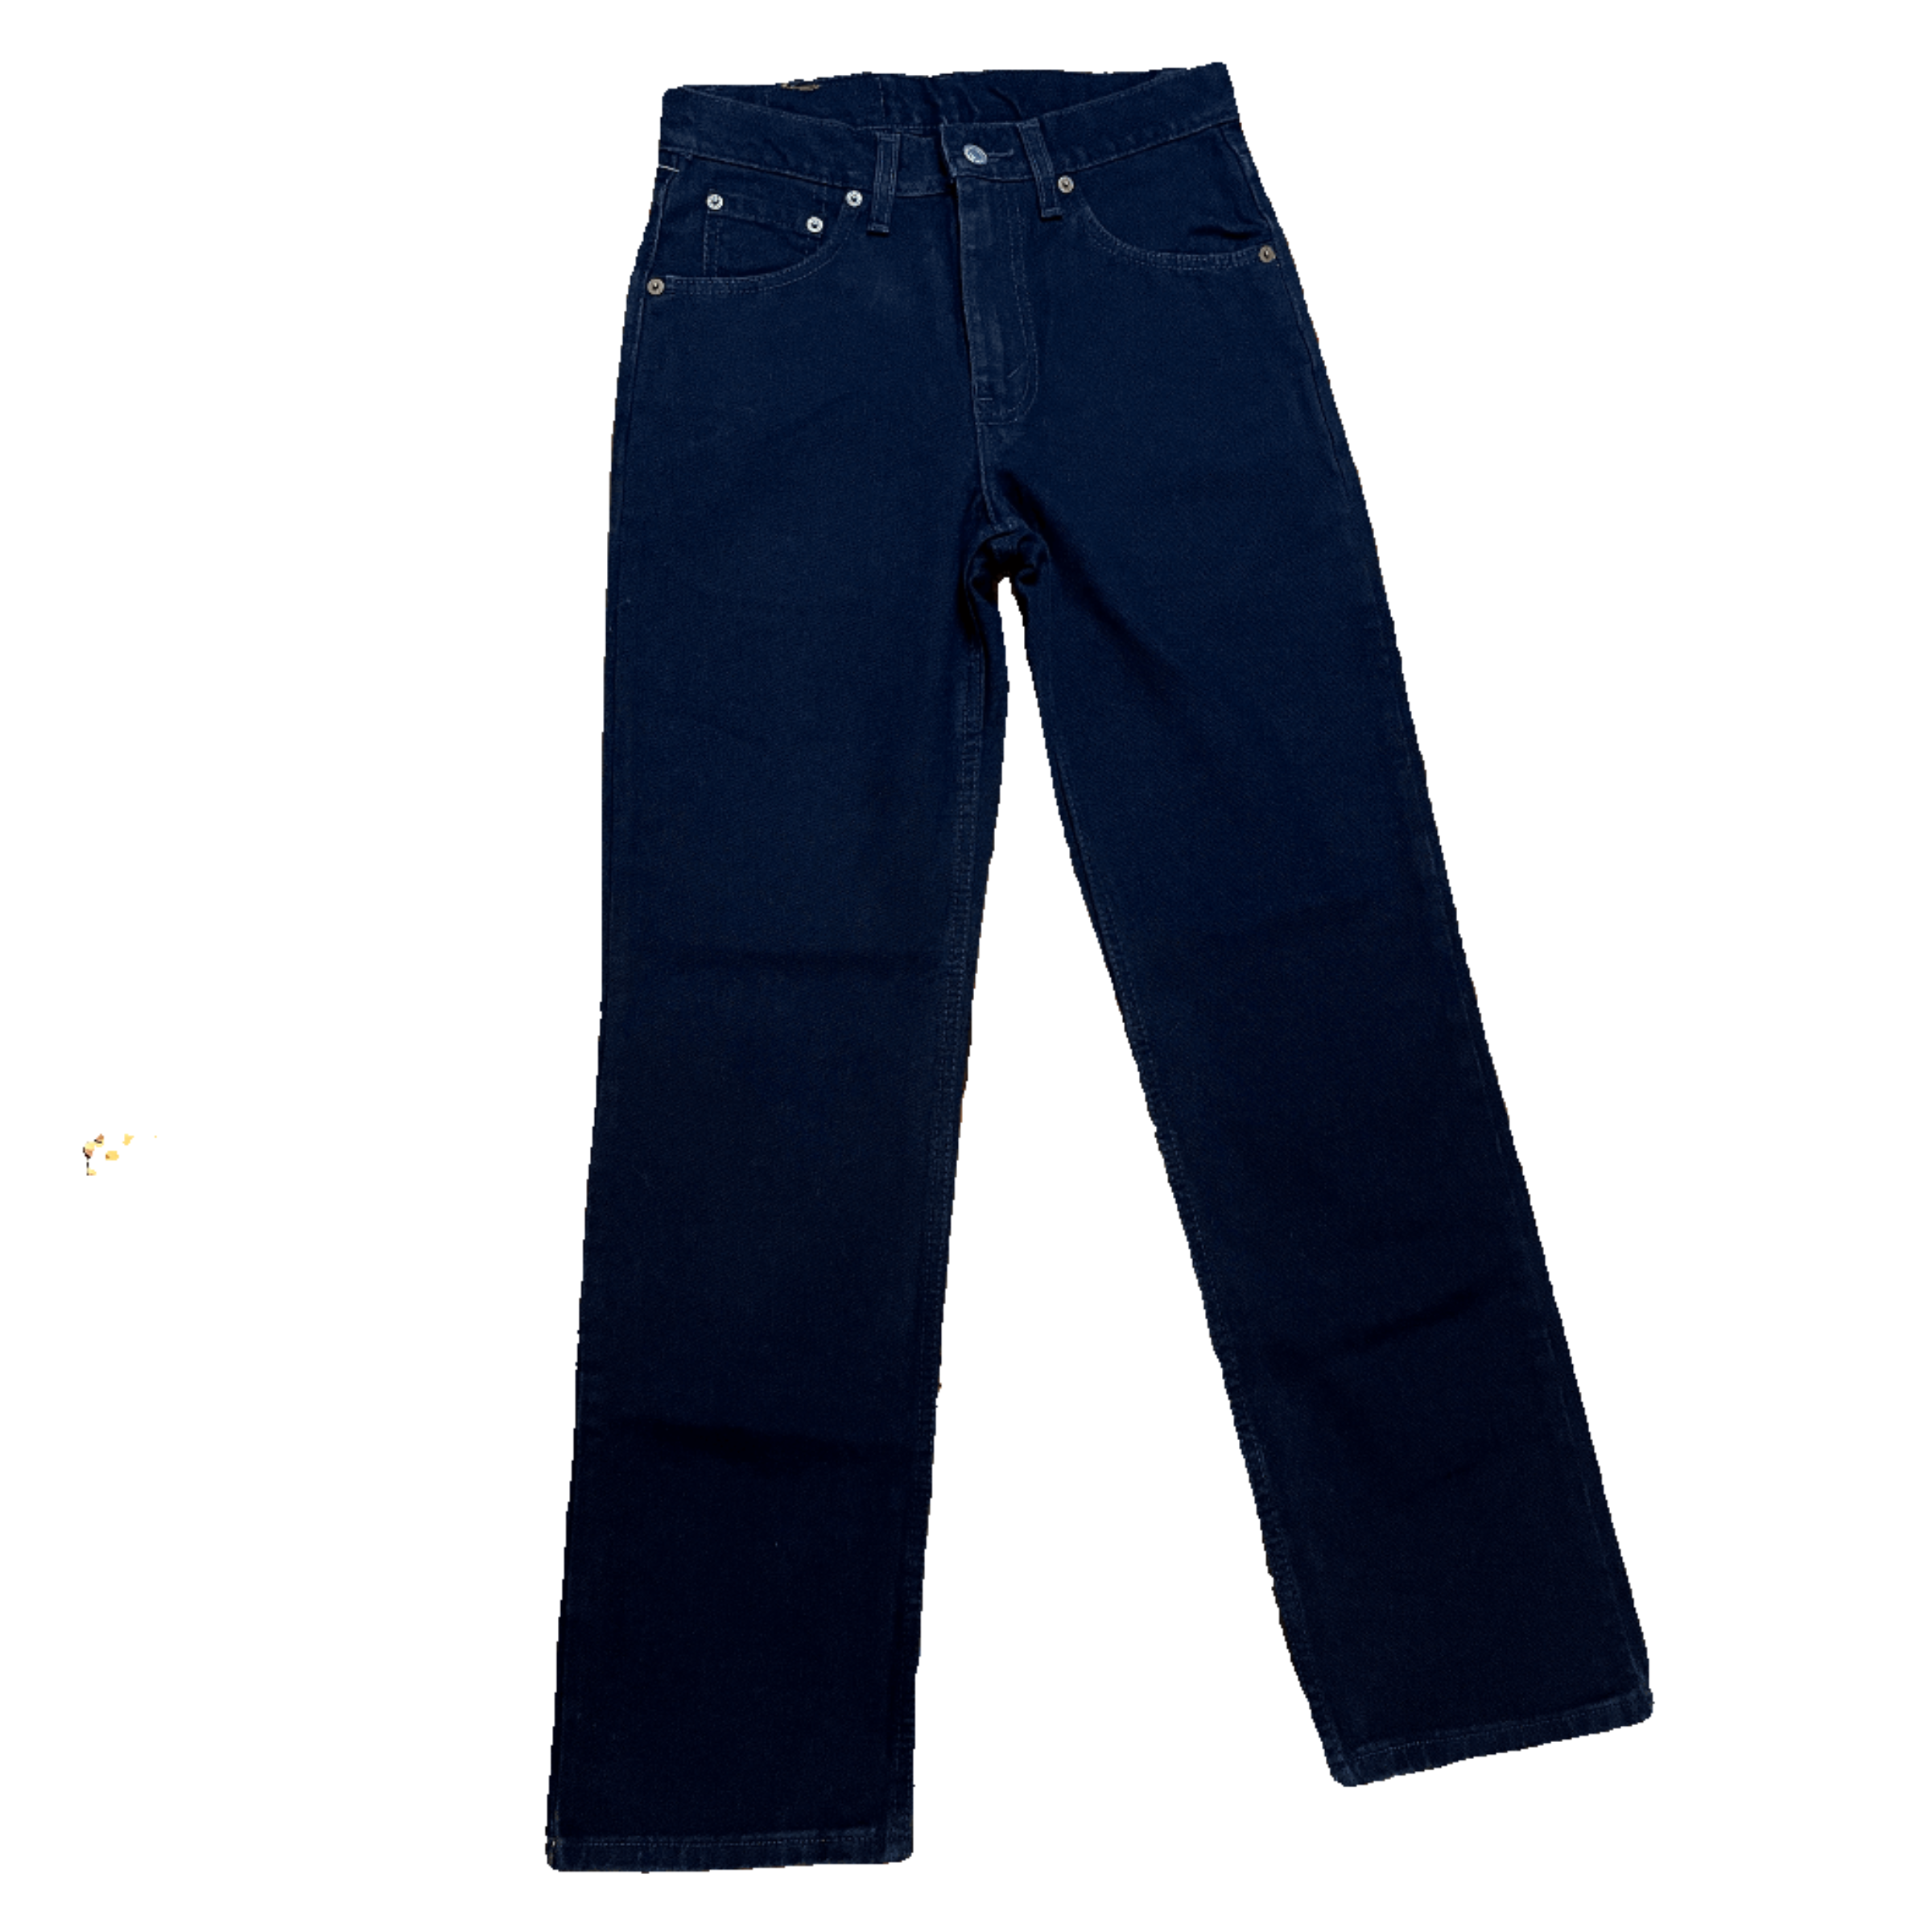 Wholesale american eagle jeans For A Pull-On Classic Look 